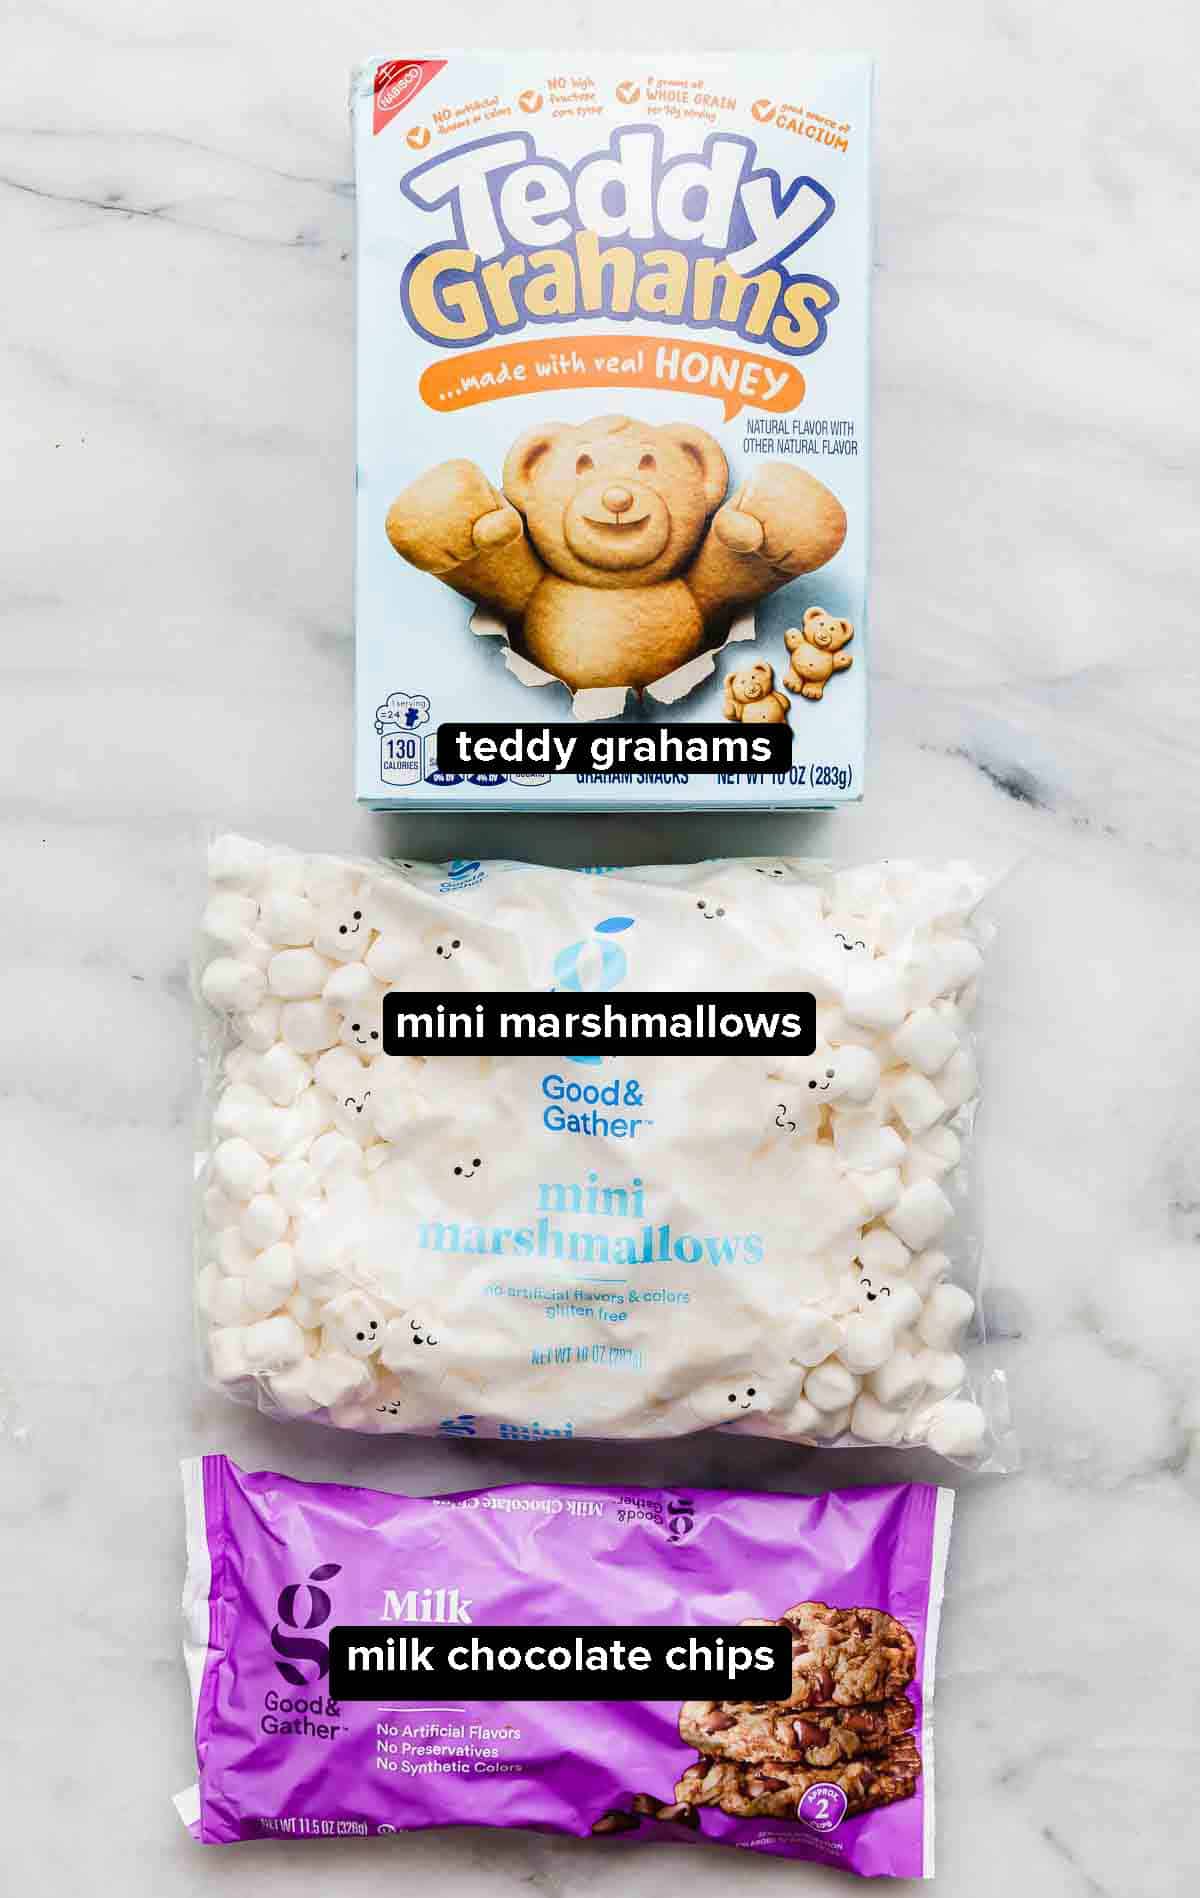 S'mores snack Mix ingredients: a box of teddy grahams, mini marshmallows, and a bag of milk chocolate chips on a white background.